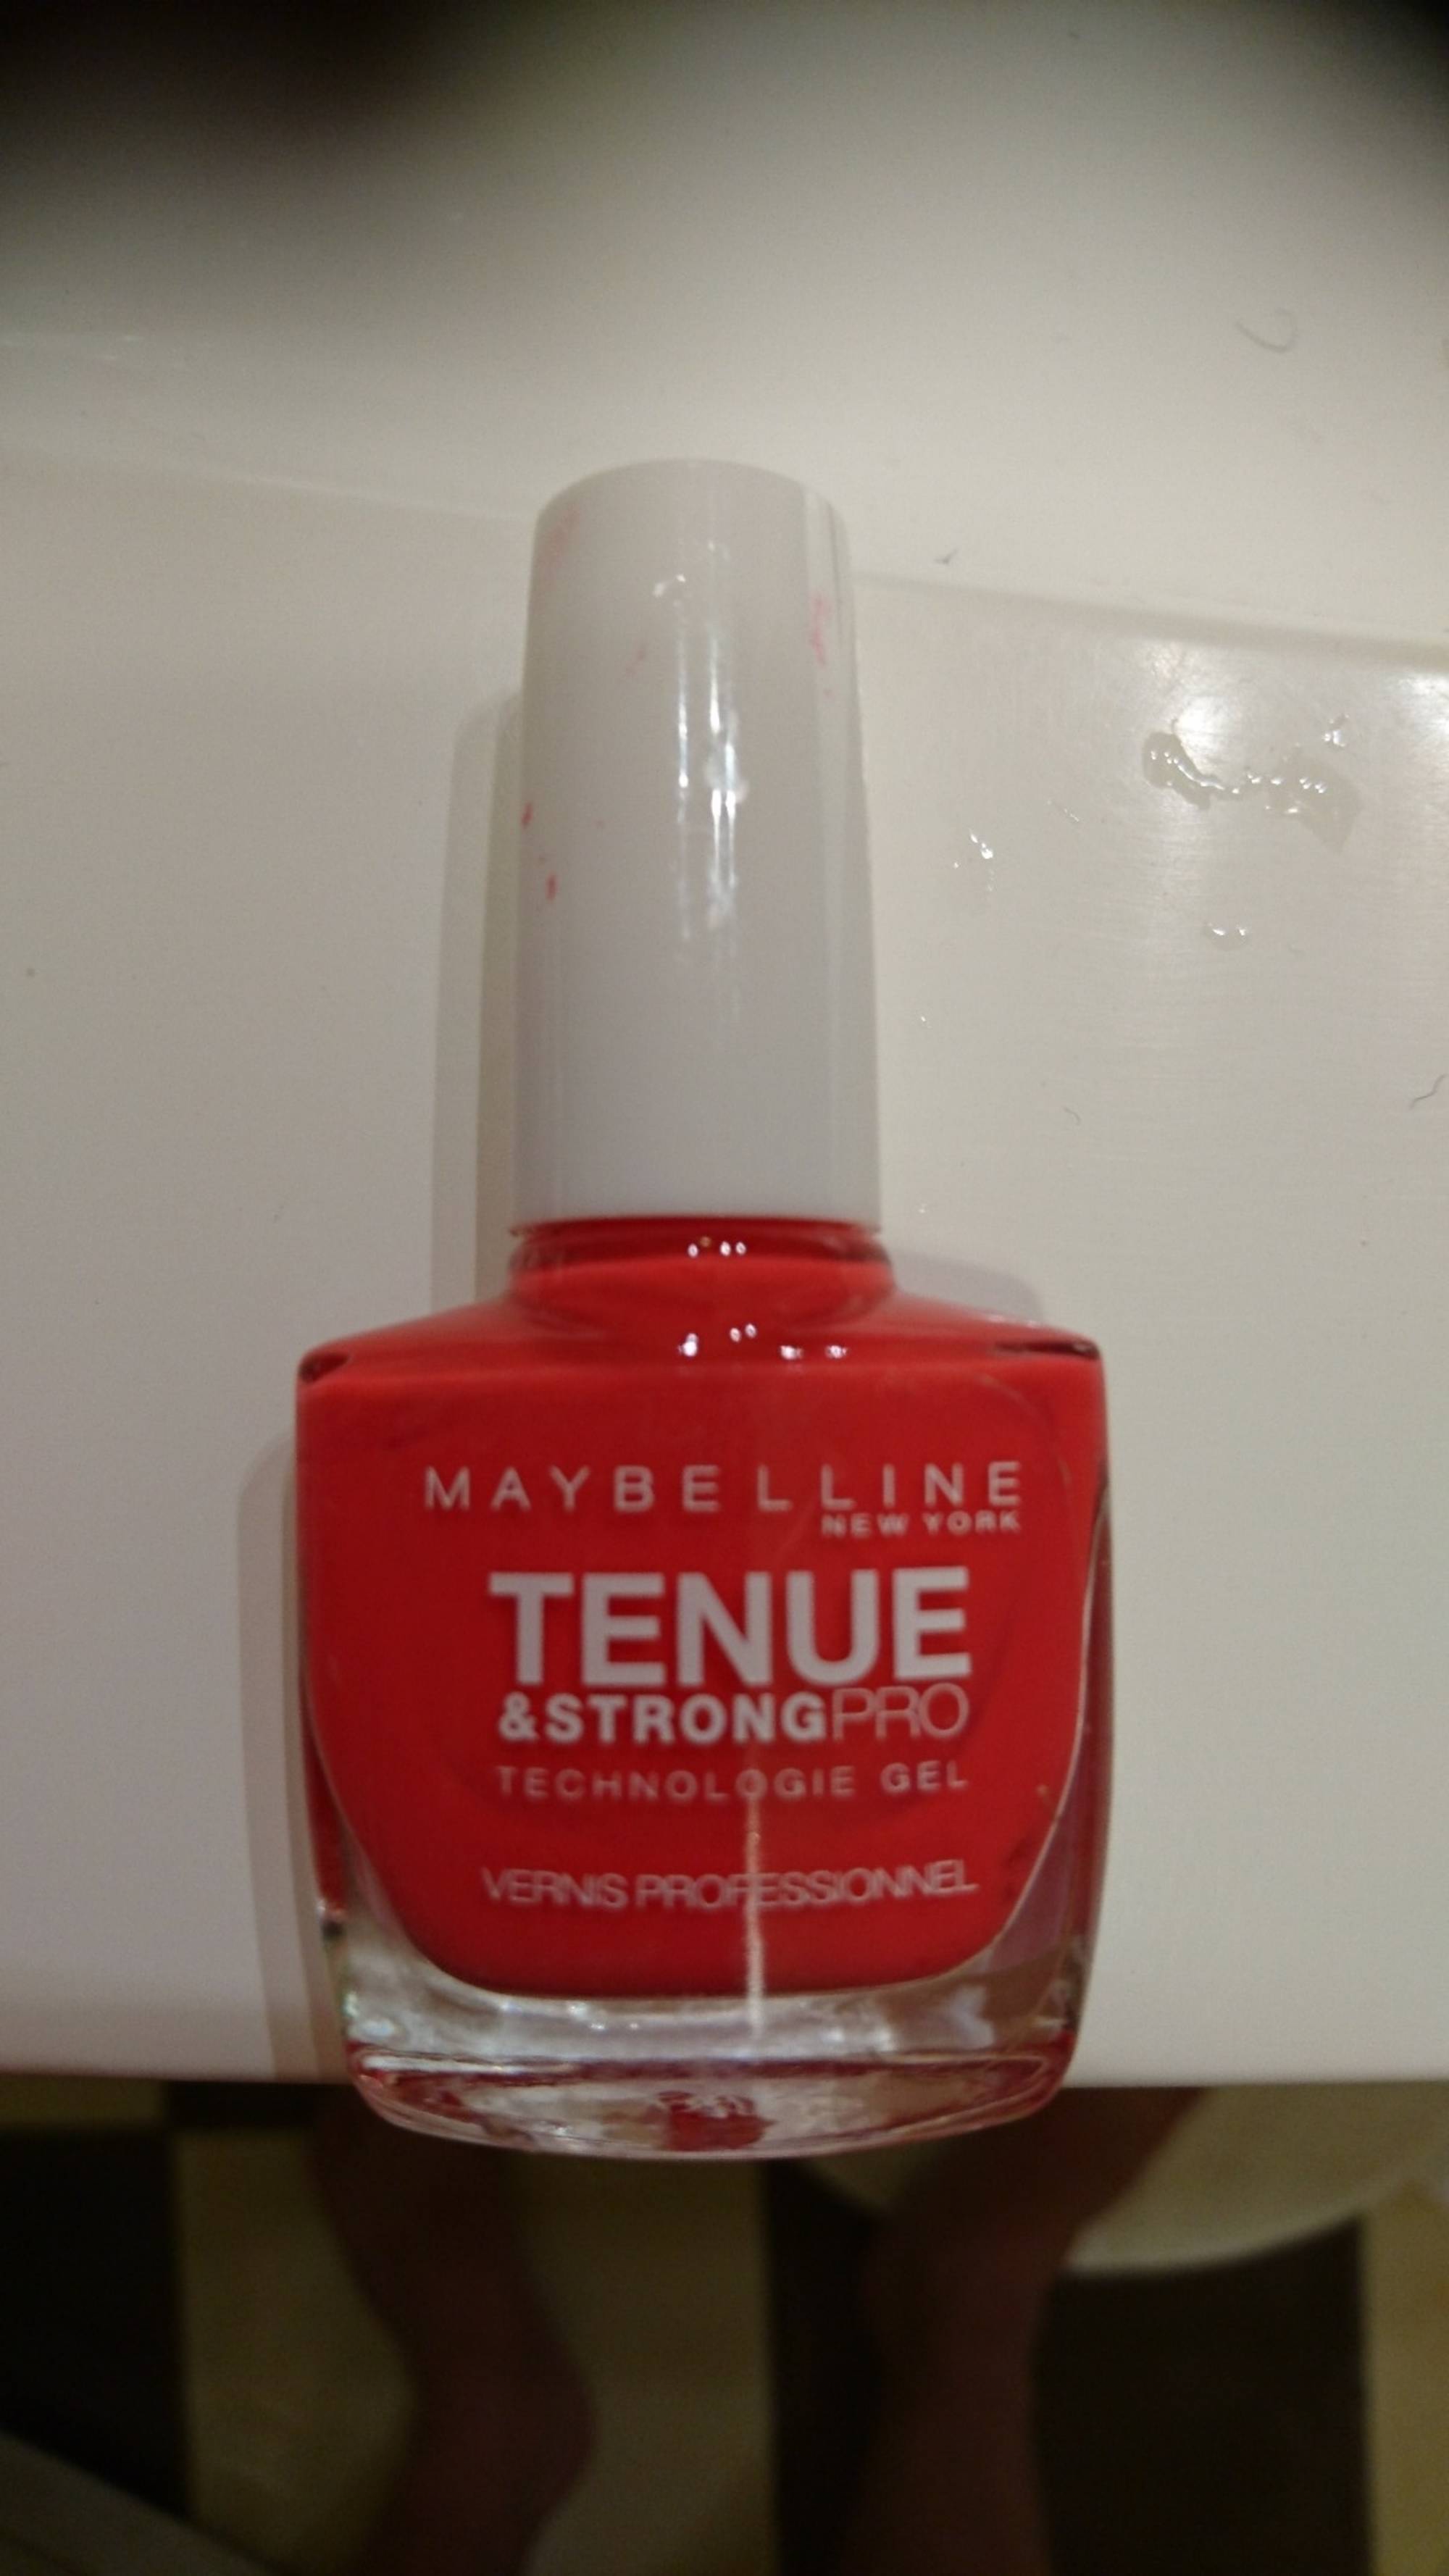 GEMEY MAYBELLINE - Tenue & Strong Pro - Vernis professionnel